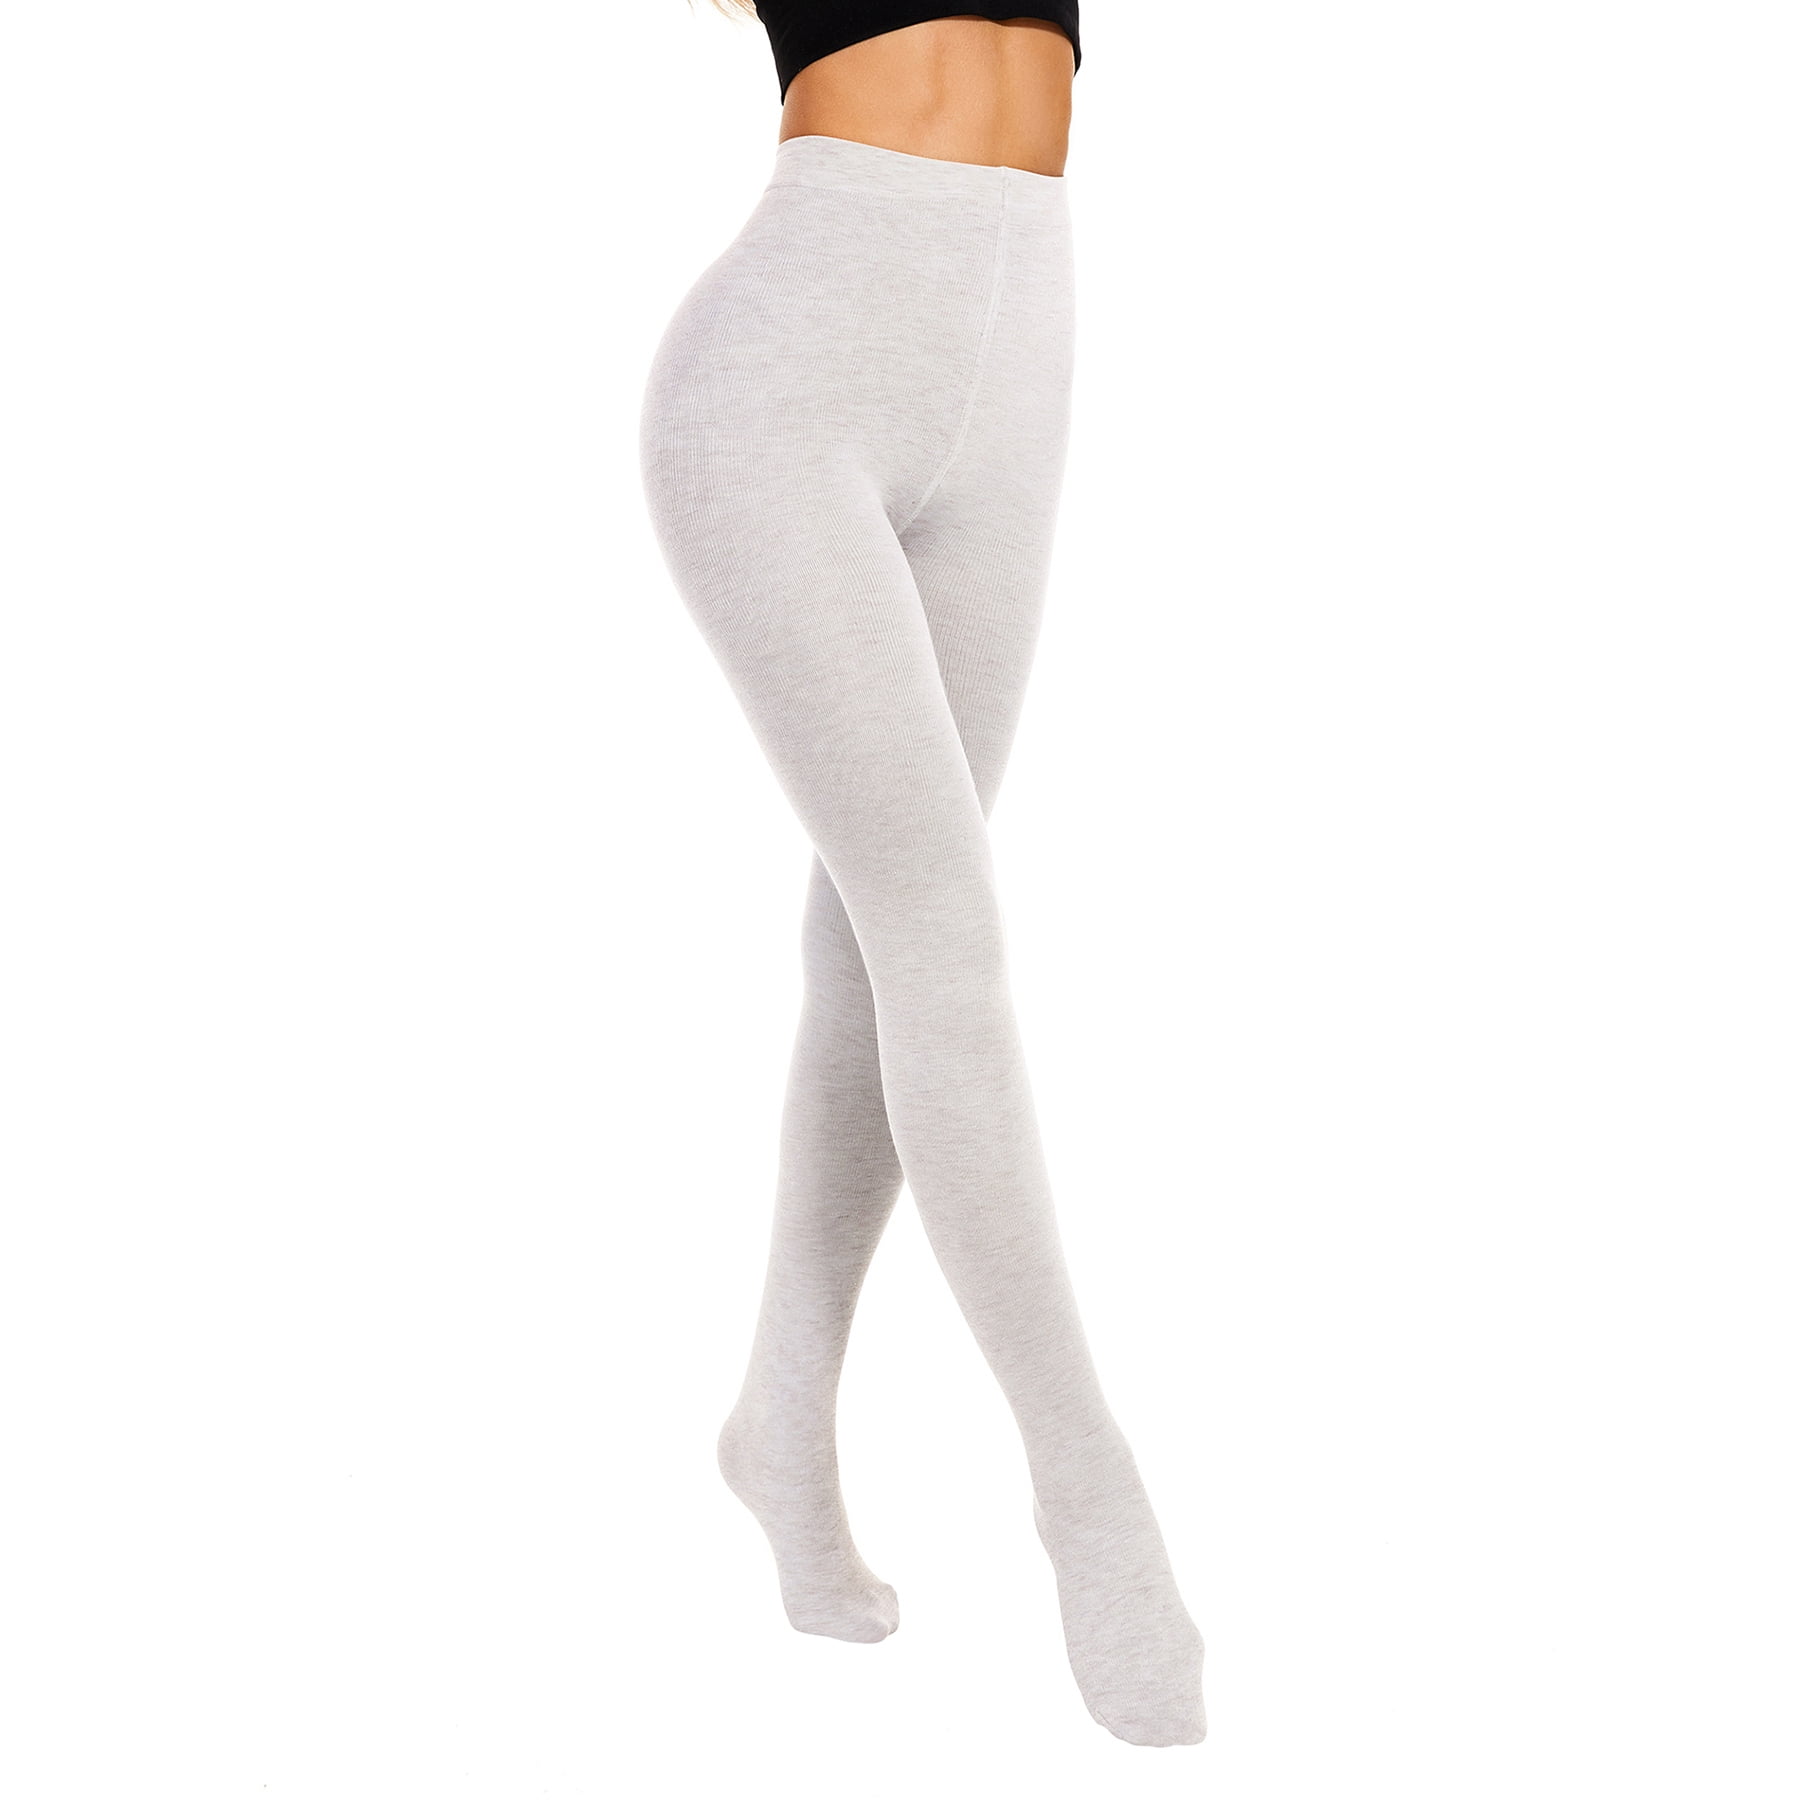 Buy Off-white Solid Tights Online - W for Woman